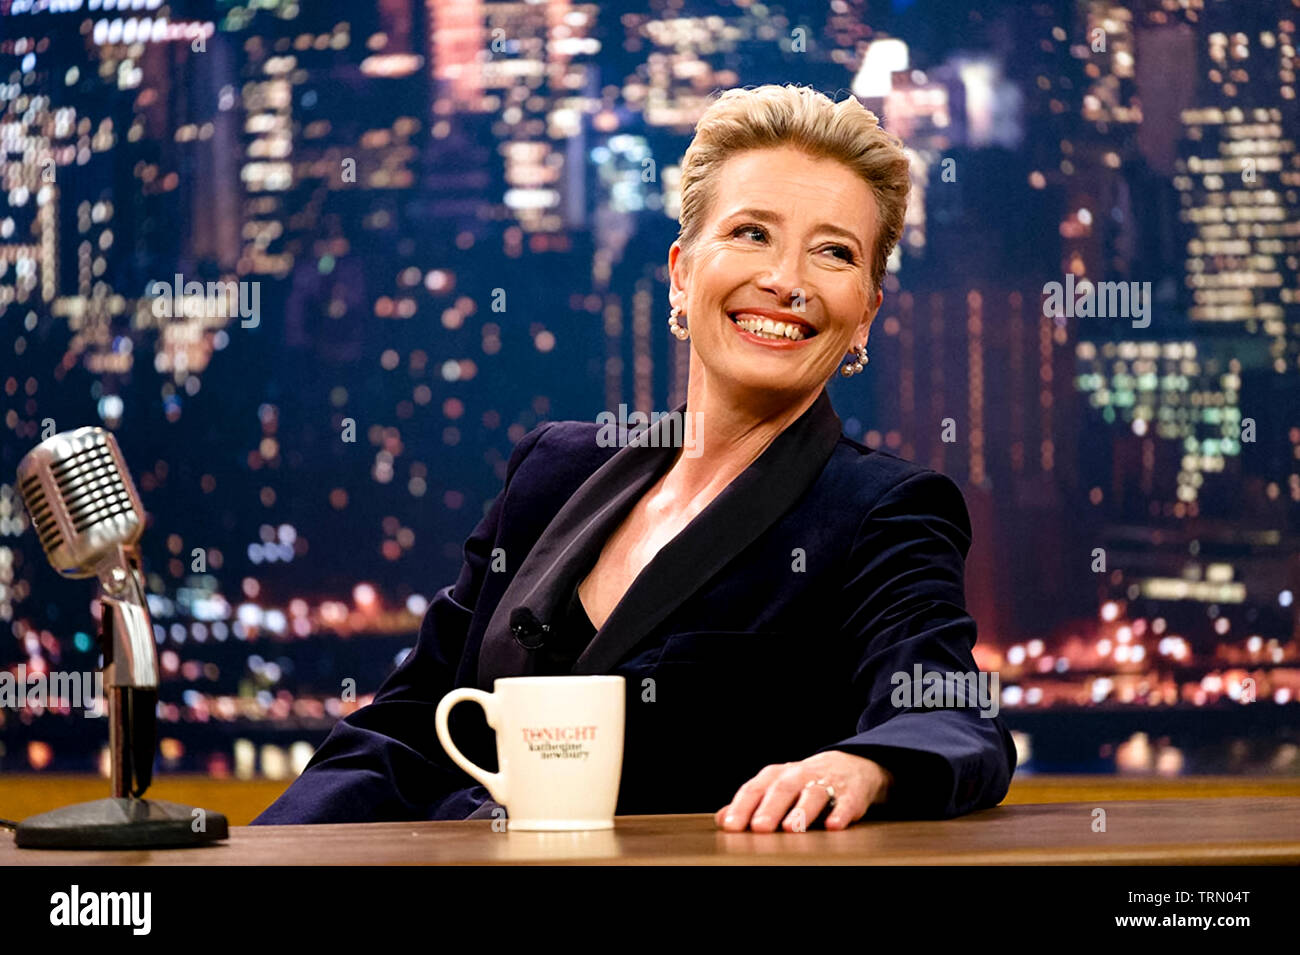 Late Night (2019) directed by Nisha Ganatra and starring  Emma Thompson, Mindy Kaling and John Lithgow. A late night TV talk show host with falling ratings hires a new woman writer who disrupts the status quo. Stock Photo